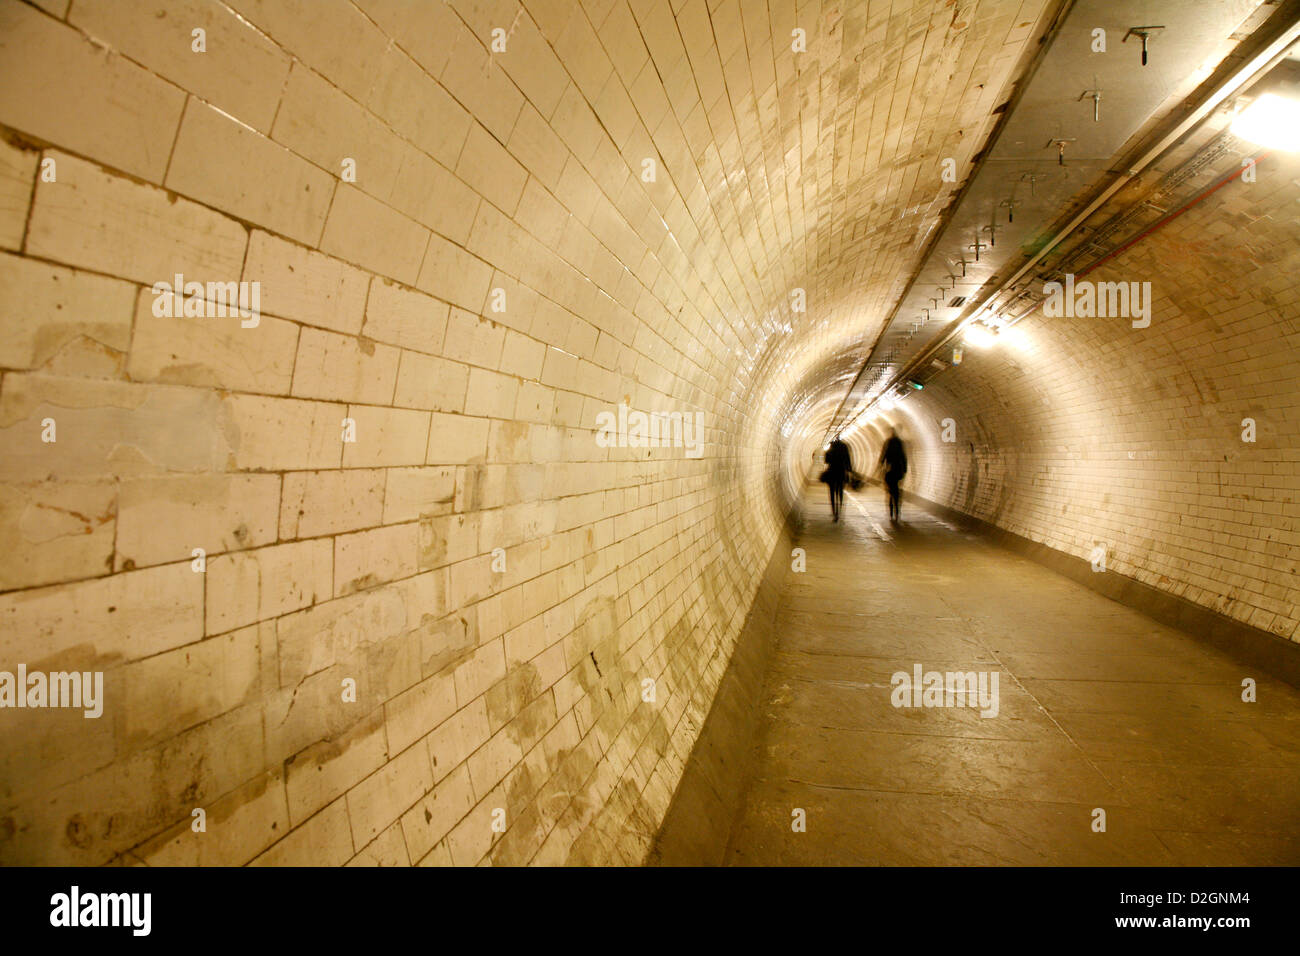 Greenwich Foot Tunnel that runs under the River Thames between Greenwich and the Isle of Dogs, London, UK Stock Photo